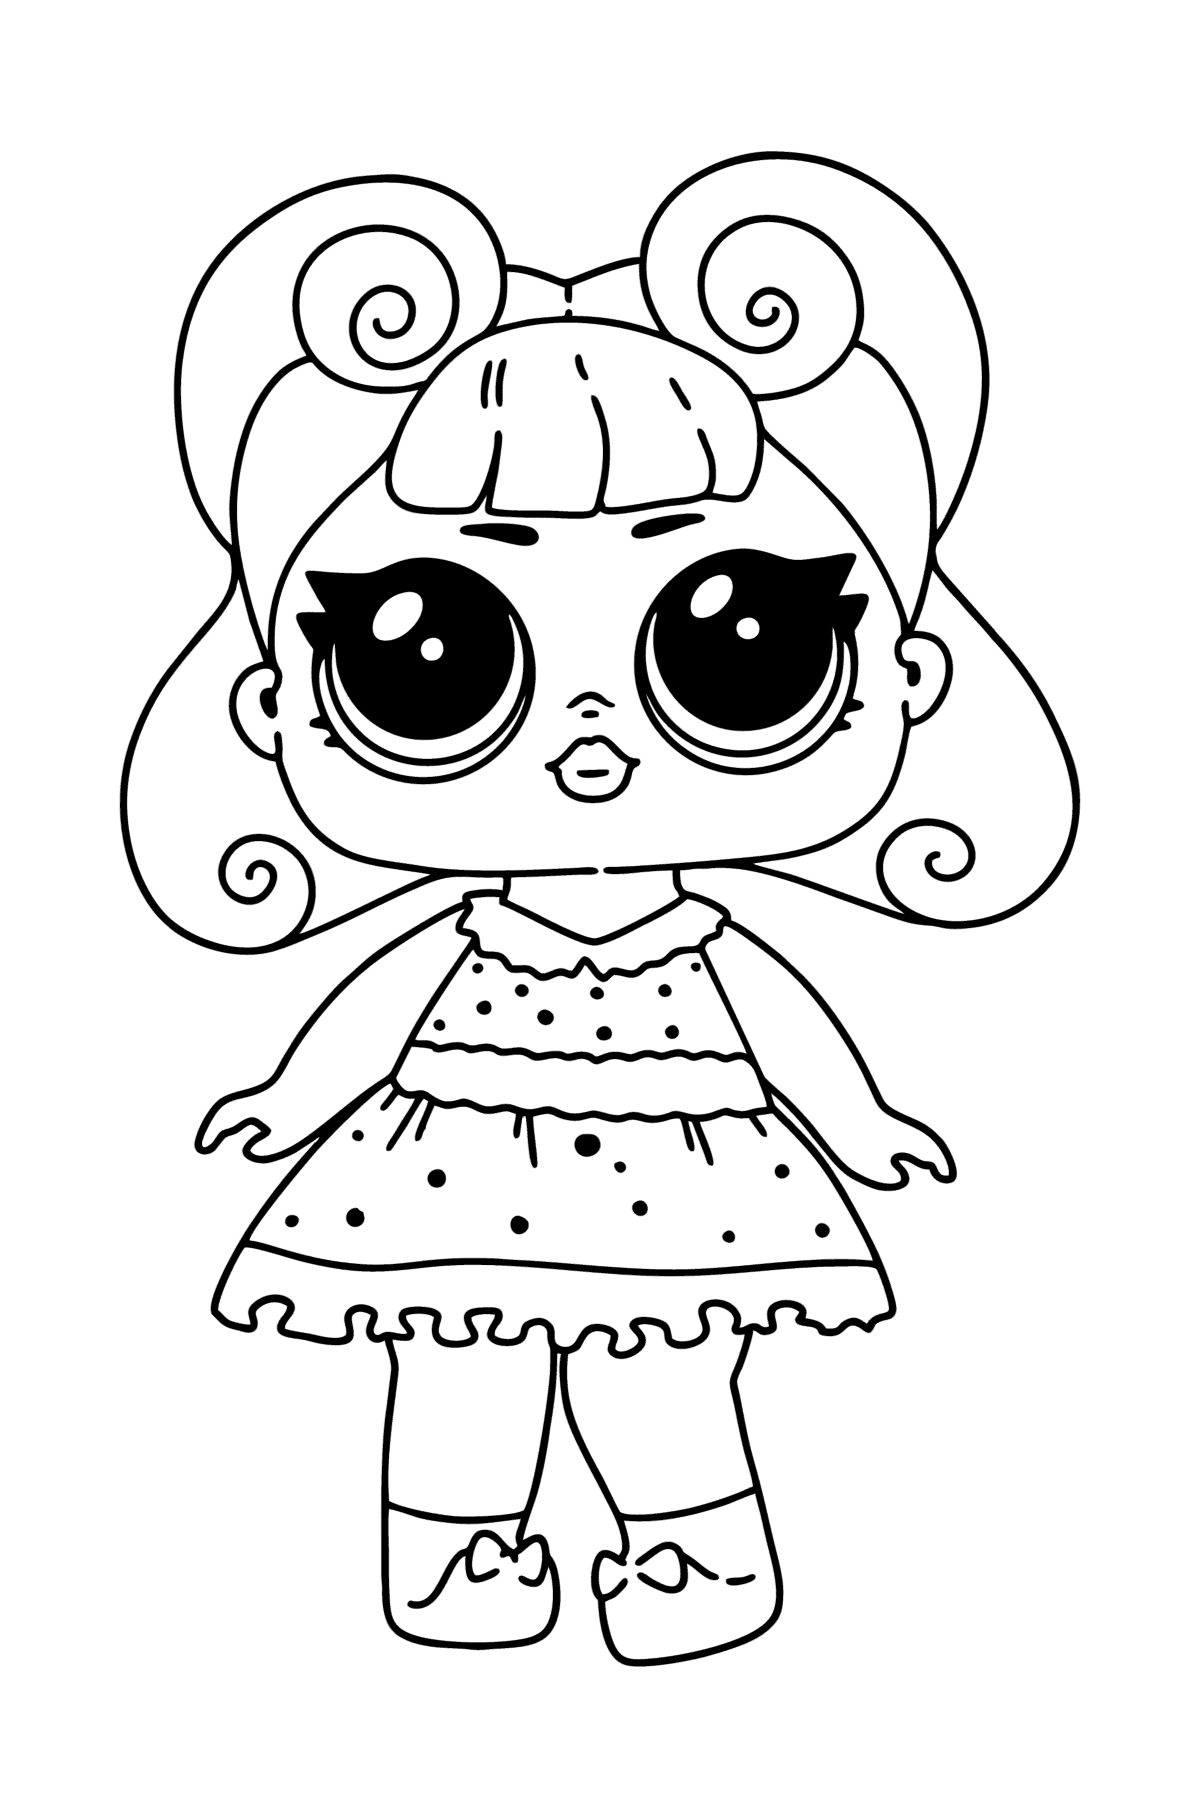 LOL Surprise Jitterbug coloring page ♥ Online and Print for Free